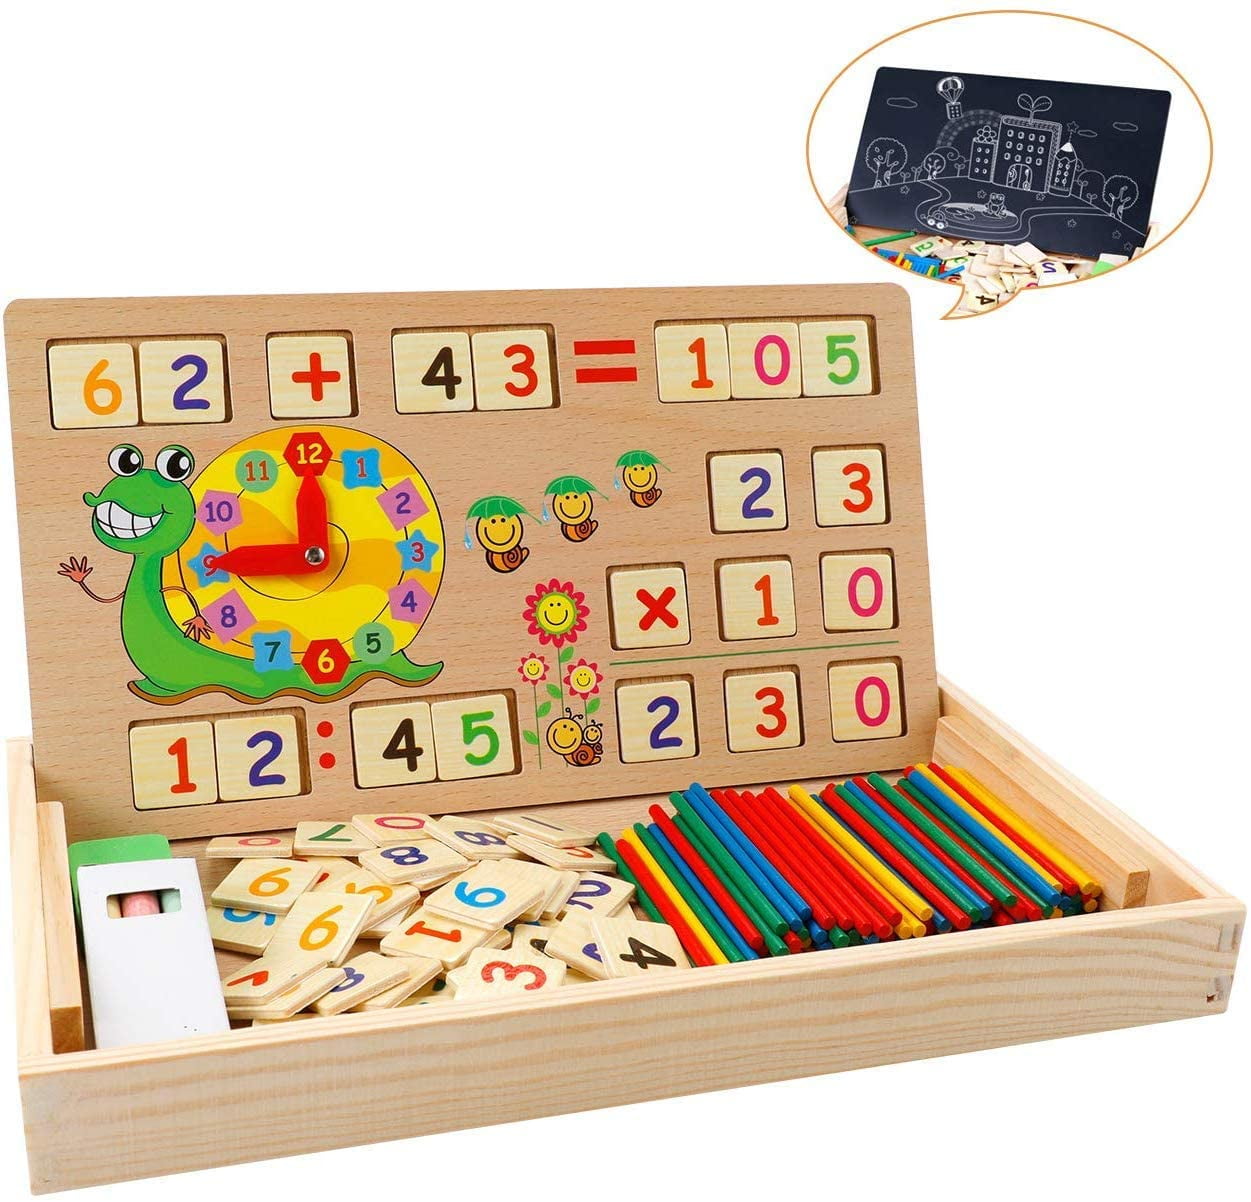 Montessori Math Toy Wooden Number Game Educational Learning Counting Game S 